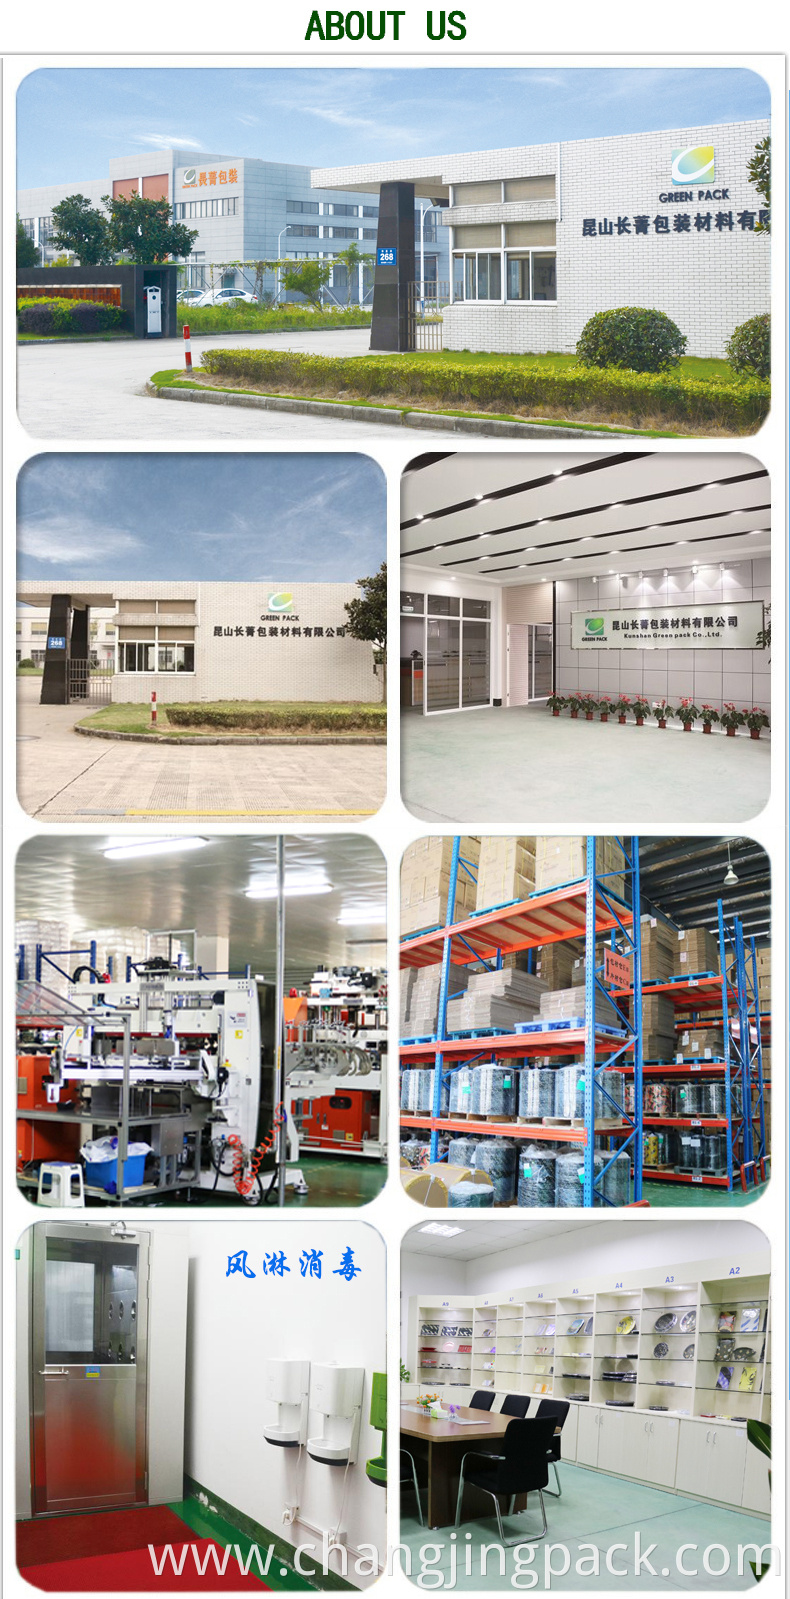 About US(Kunshan Green Pack/Ever Green)